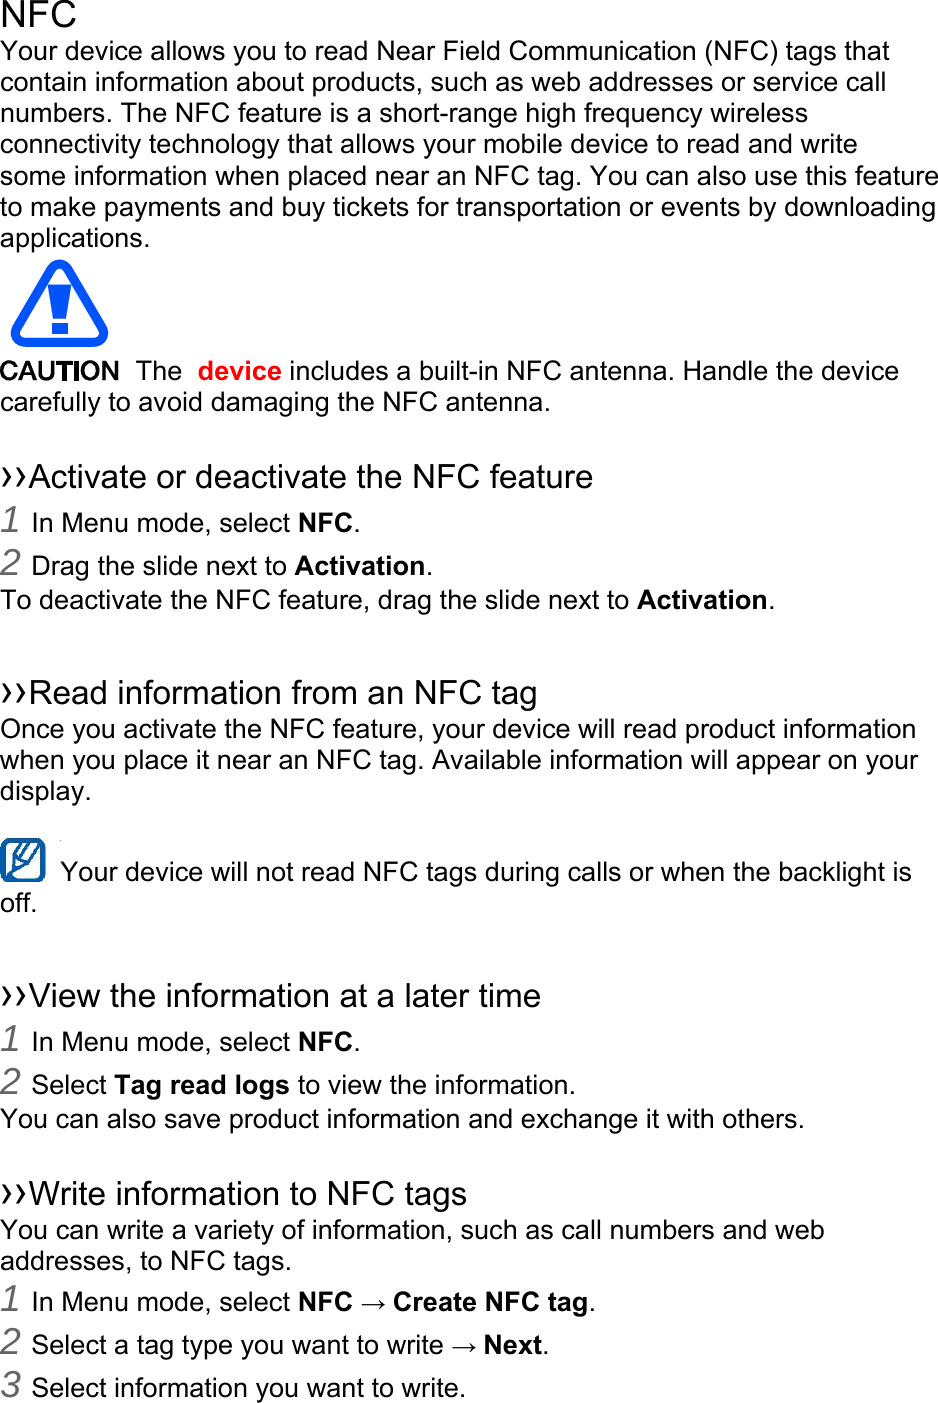 NFC Your device allows you to read Near Field Communication (NFC) tags that contain information about products, such as web addresses or service call numbers. The NFC feature is a short-range high frequency wireless connectivity technology that allows your mobile device to read and write some information when placed near an NFC tag. You can also use this feature to make payments and buy tickets for transportation or events by downloading applications.   The  device includes a built-in NFC antenna. Handle the device carefully to avoid damaging the NFC antenna.  ››Activate or deactivate the NFC feature 1 In Menu mode, select NFC. 2 Drag the slide next to Activation. To deactivate the NFC feature, drag the slide next to Activation.  ››Read information from an NFC tag Once you activate the NFC feature, your device will read product information when you place it near an NFC tag. Available information will appear on your display.  Your device will not read NFC tags during calls or when the backlight is   off.  ››View the information at a later time 1 In Menu mode, select NFC. 2 Select Tag read logs to view the information. You can also save product information and exchange it with others.  ››Write information to NFC tags   You can write a variety of information, such as call numbers and web addresses, to NFC tags. 1 In Menu mode, select NFC → Create NFC tag. 2 Select a tag type you want to write → Next. 3 Select information you want to write. 